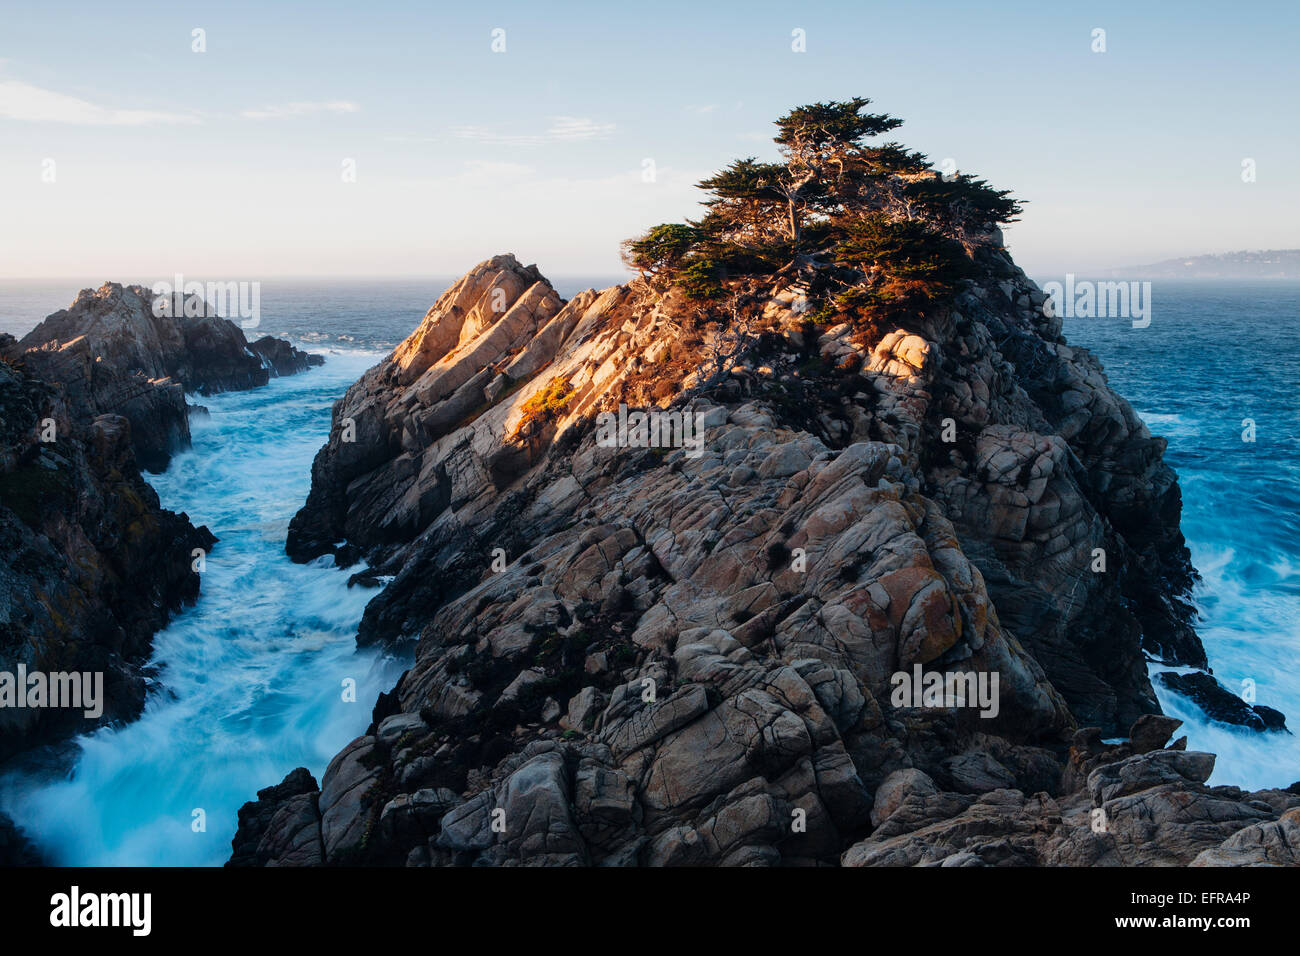 Dramatic cliffs and coastline at dusk in the Point Lobos State Reserve on the Pacific coastline. White foaming water. Stock Photo